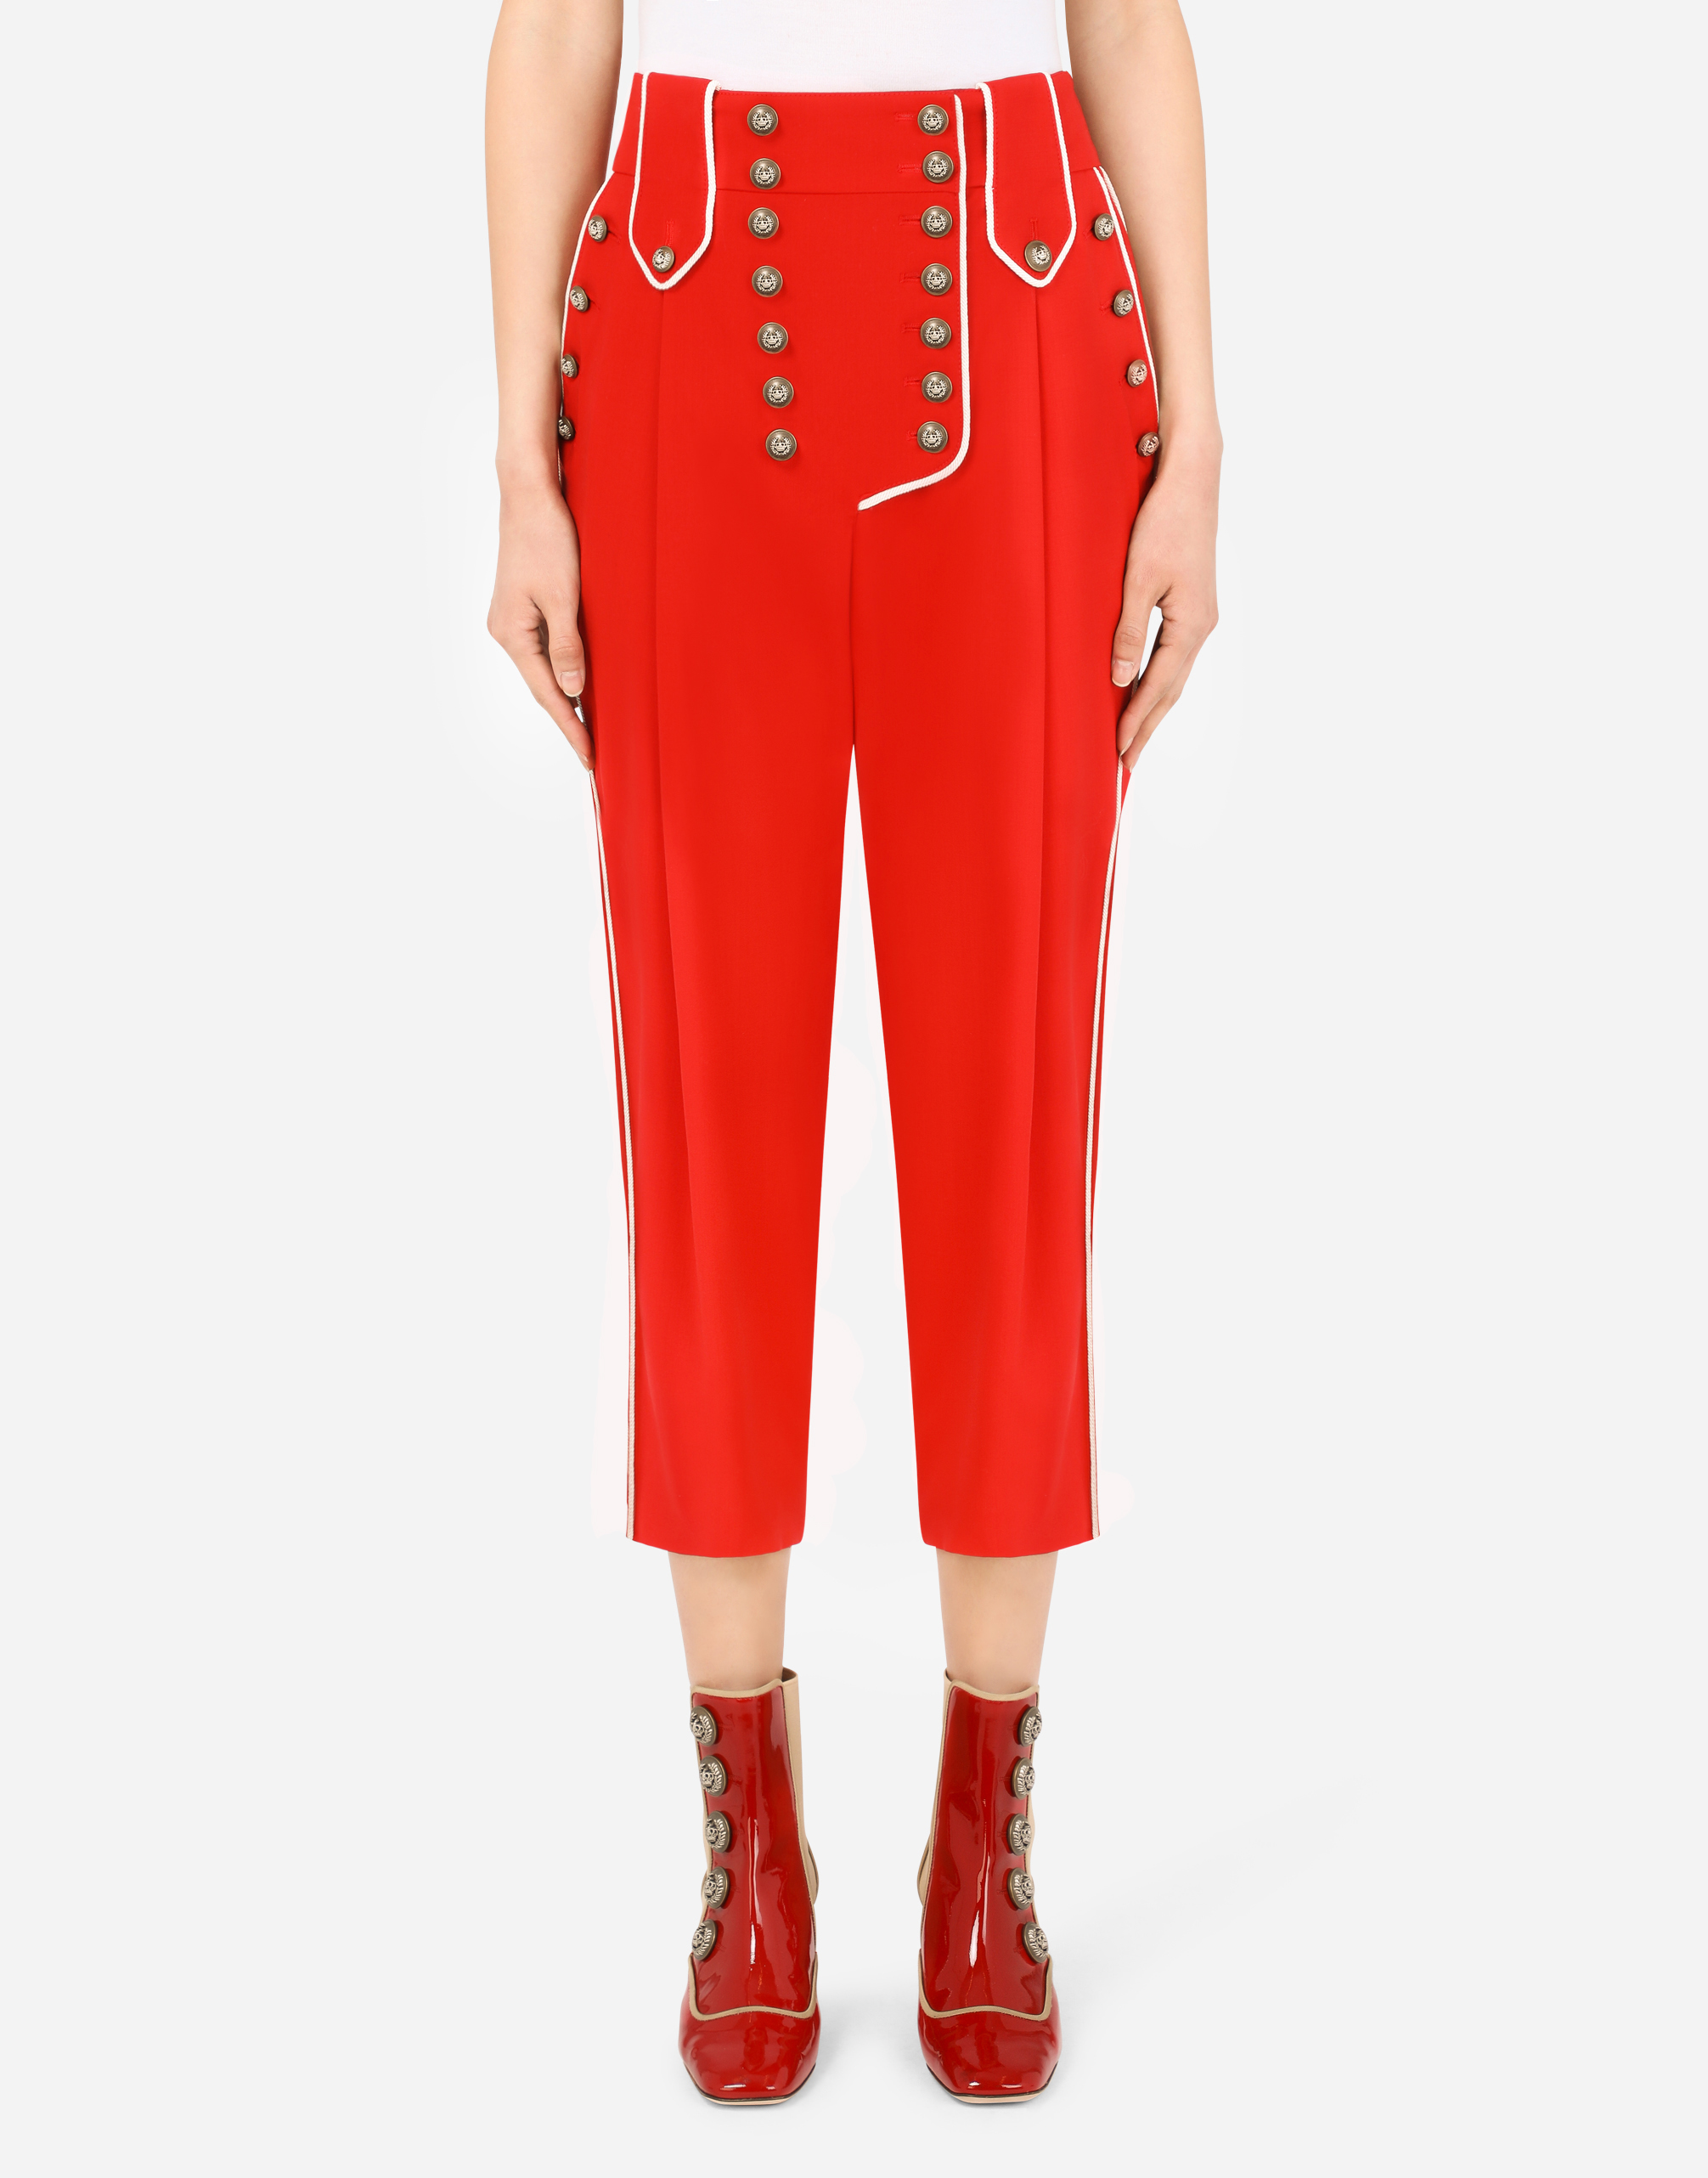 Dolce & Gabbana High-waisted Woolen Pants With Heraldic Buttons In Red